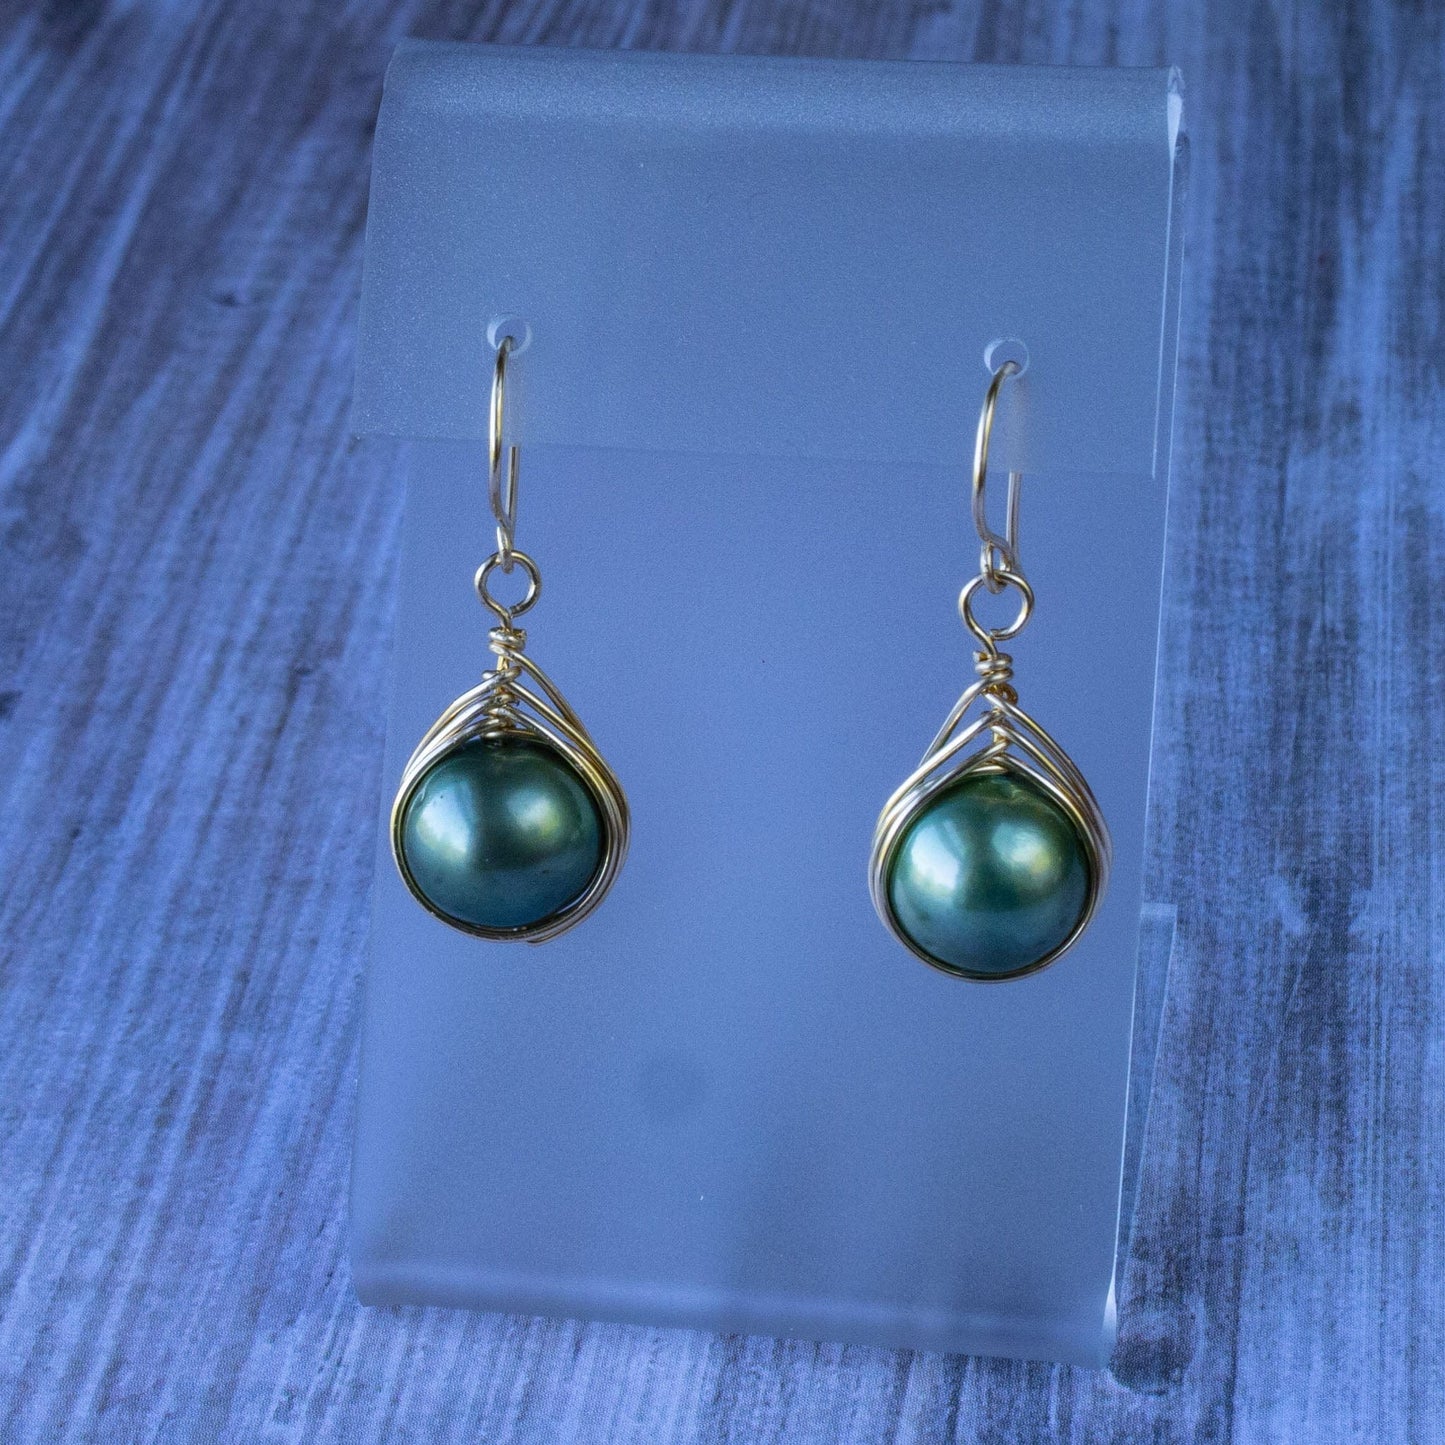 Cheekoo's Handcrafted Freshwater Green Pearl Drop Earrings, Peacock Feather Design